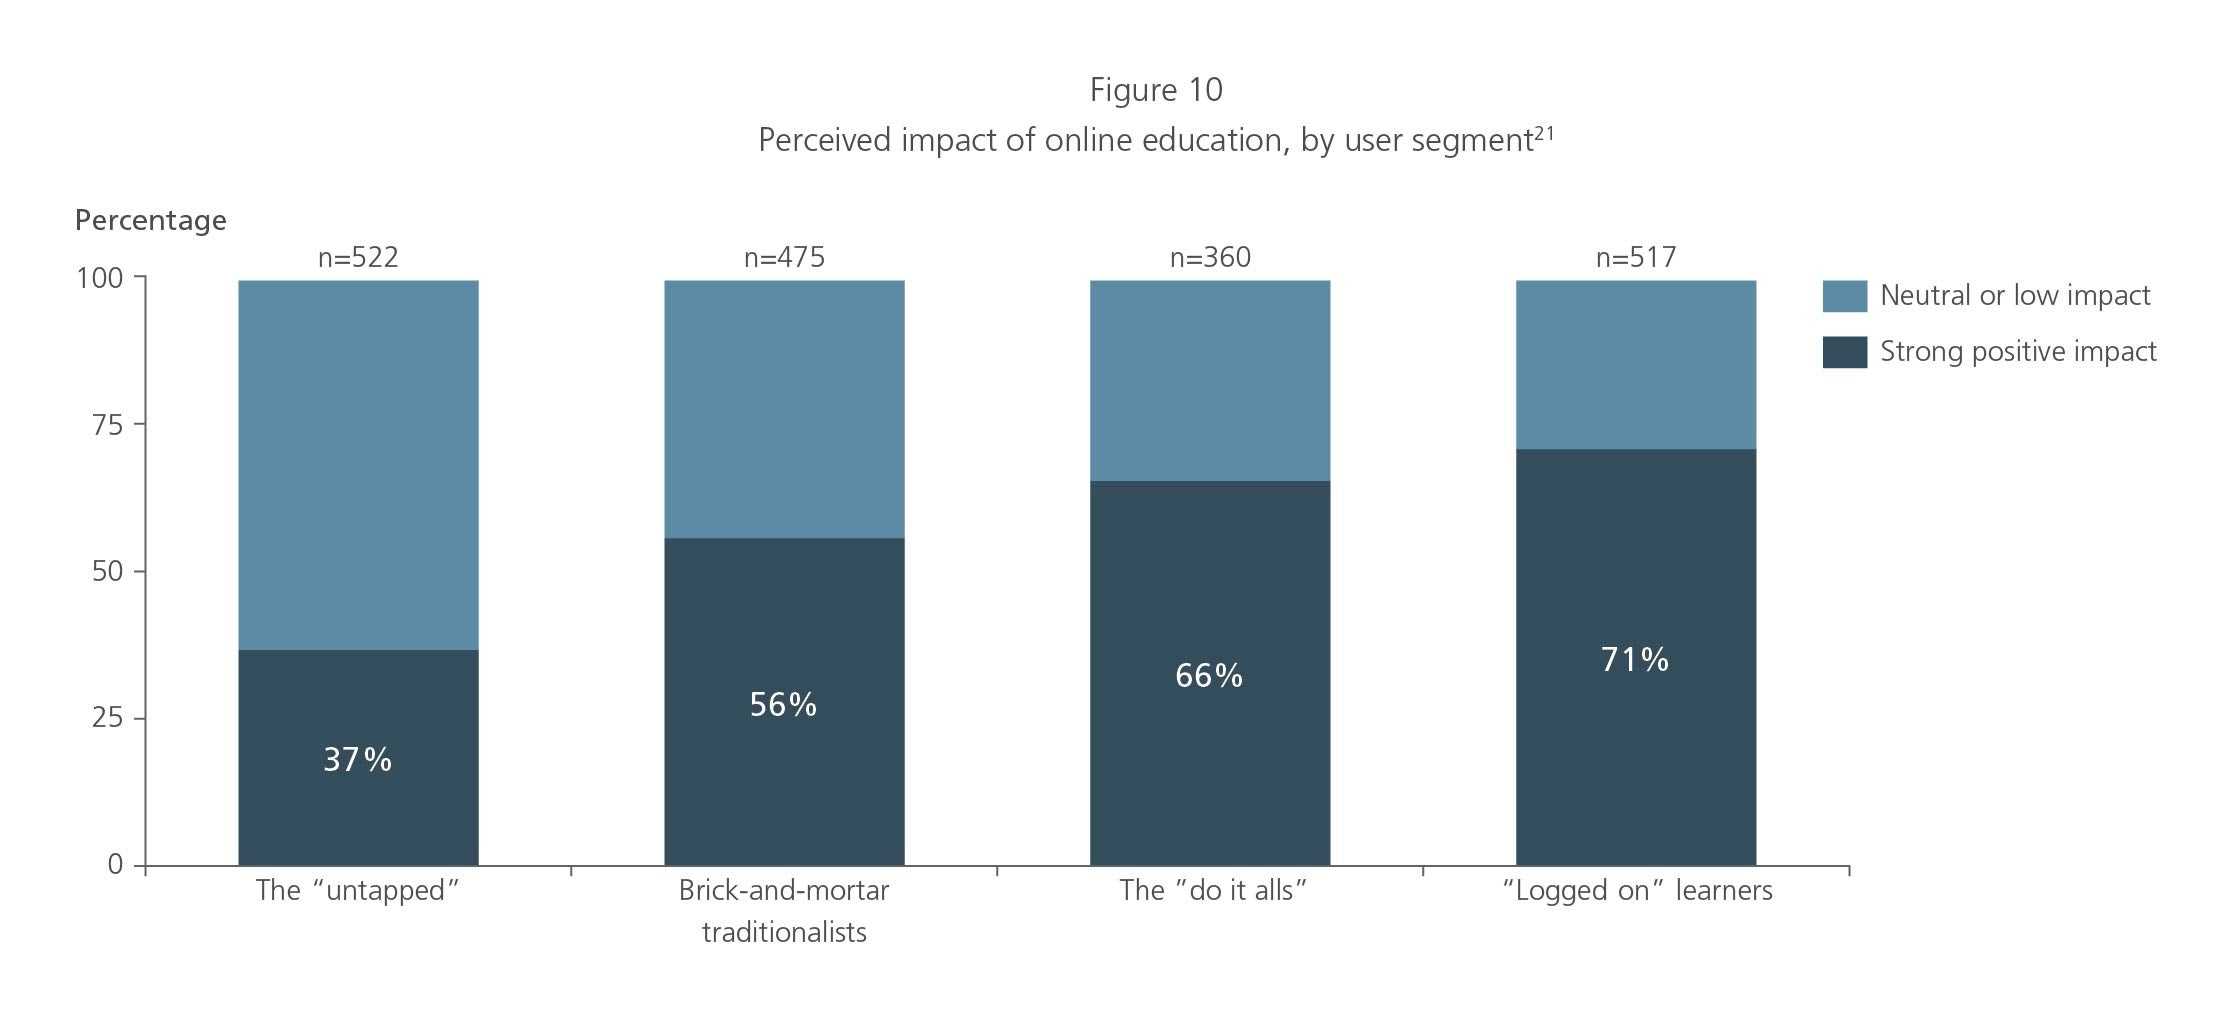 Perceived impact of online education by user segment